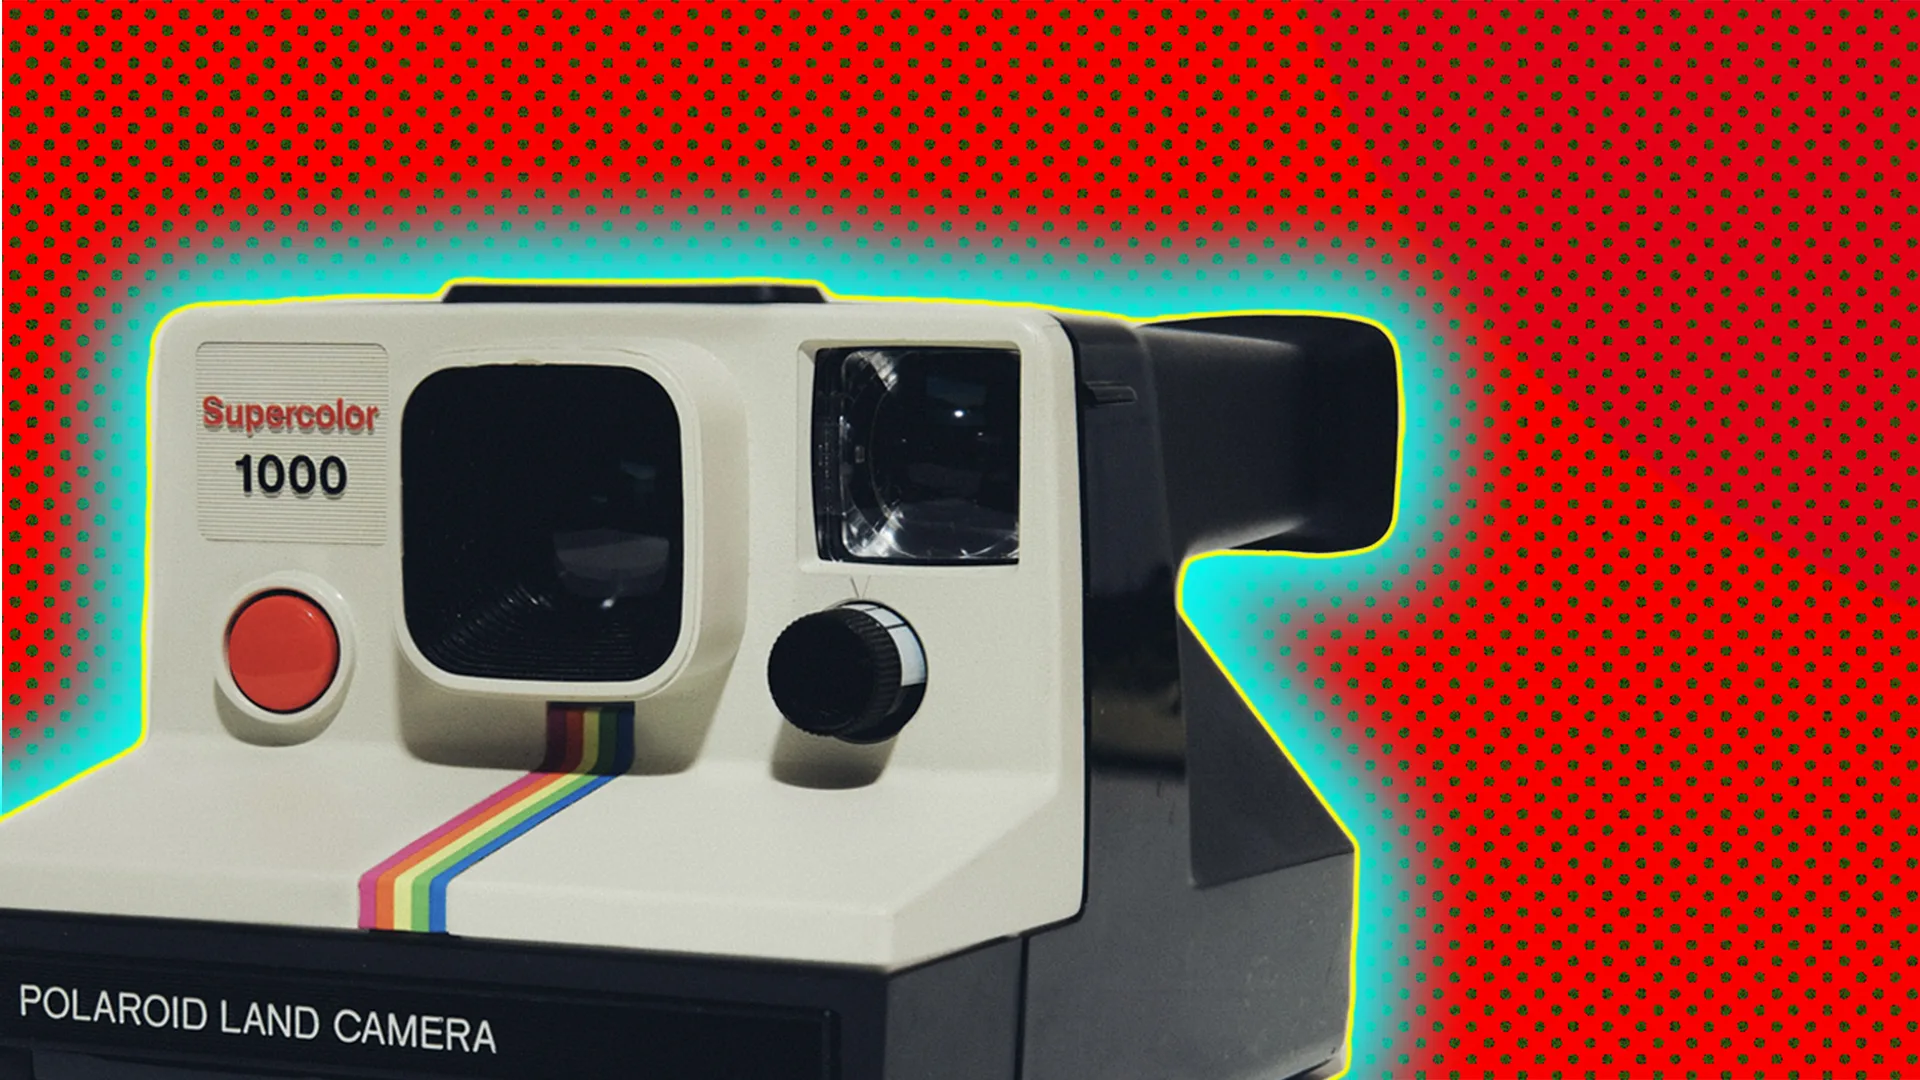 A Polaroid camera - in graphic house style